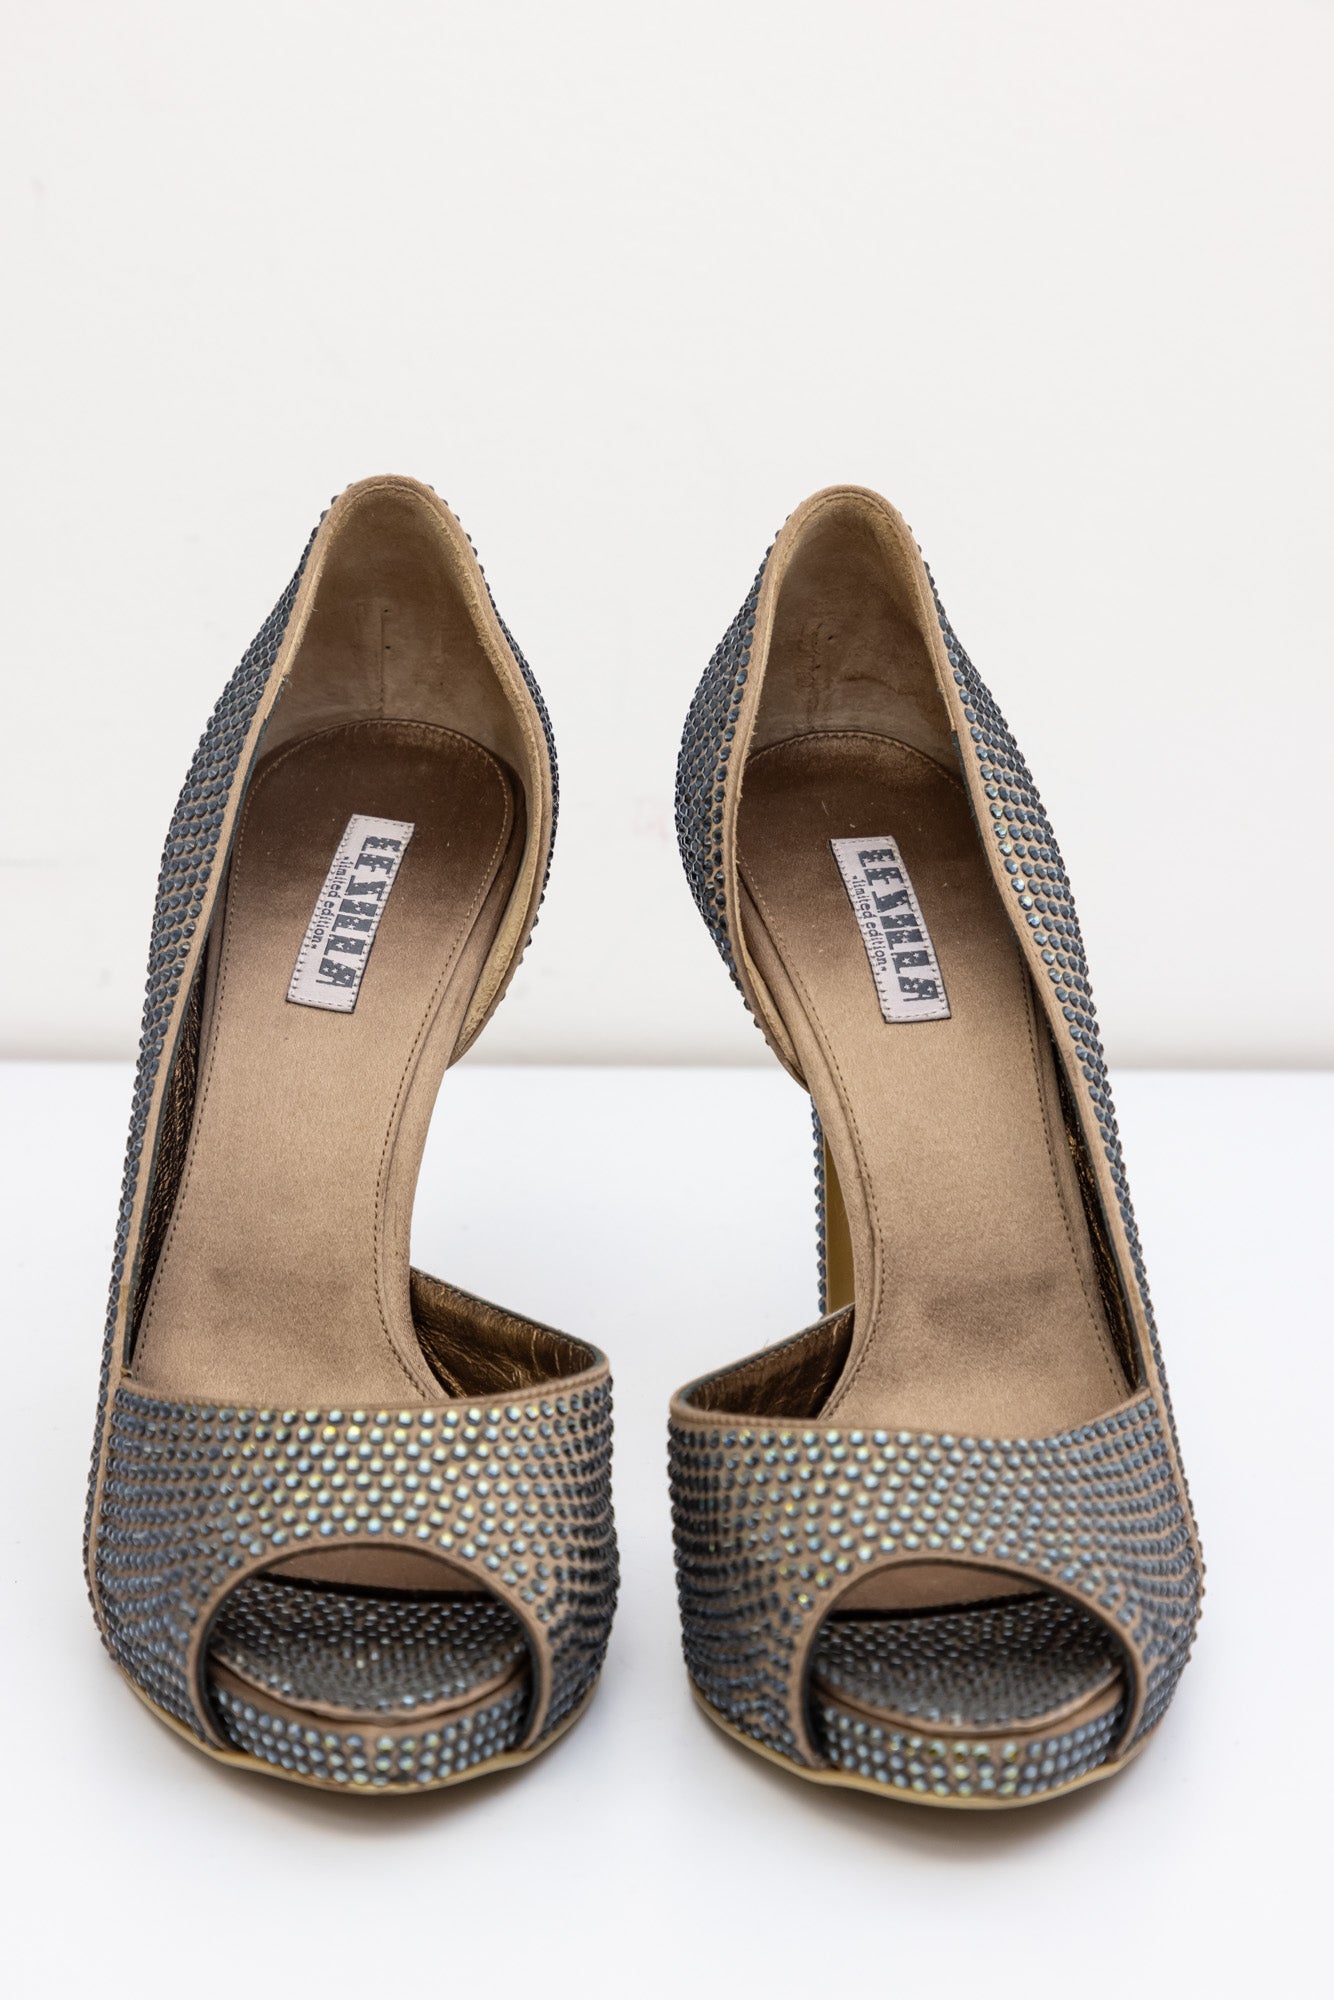 Le Silla Crystal Embellished Gold Pumps - Limited Edition Open Toe (024/050)